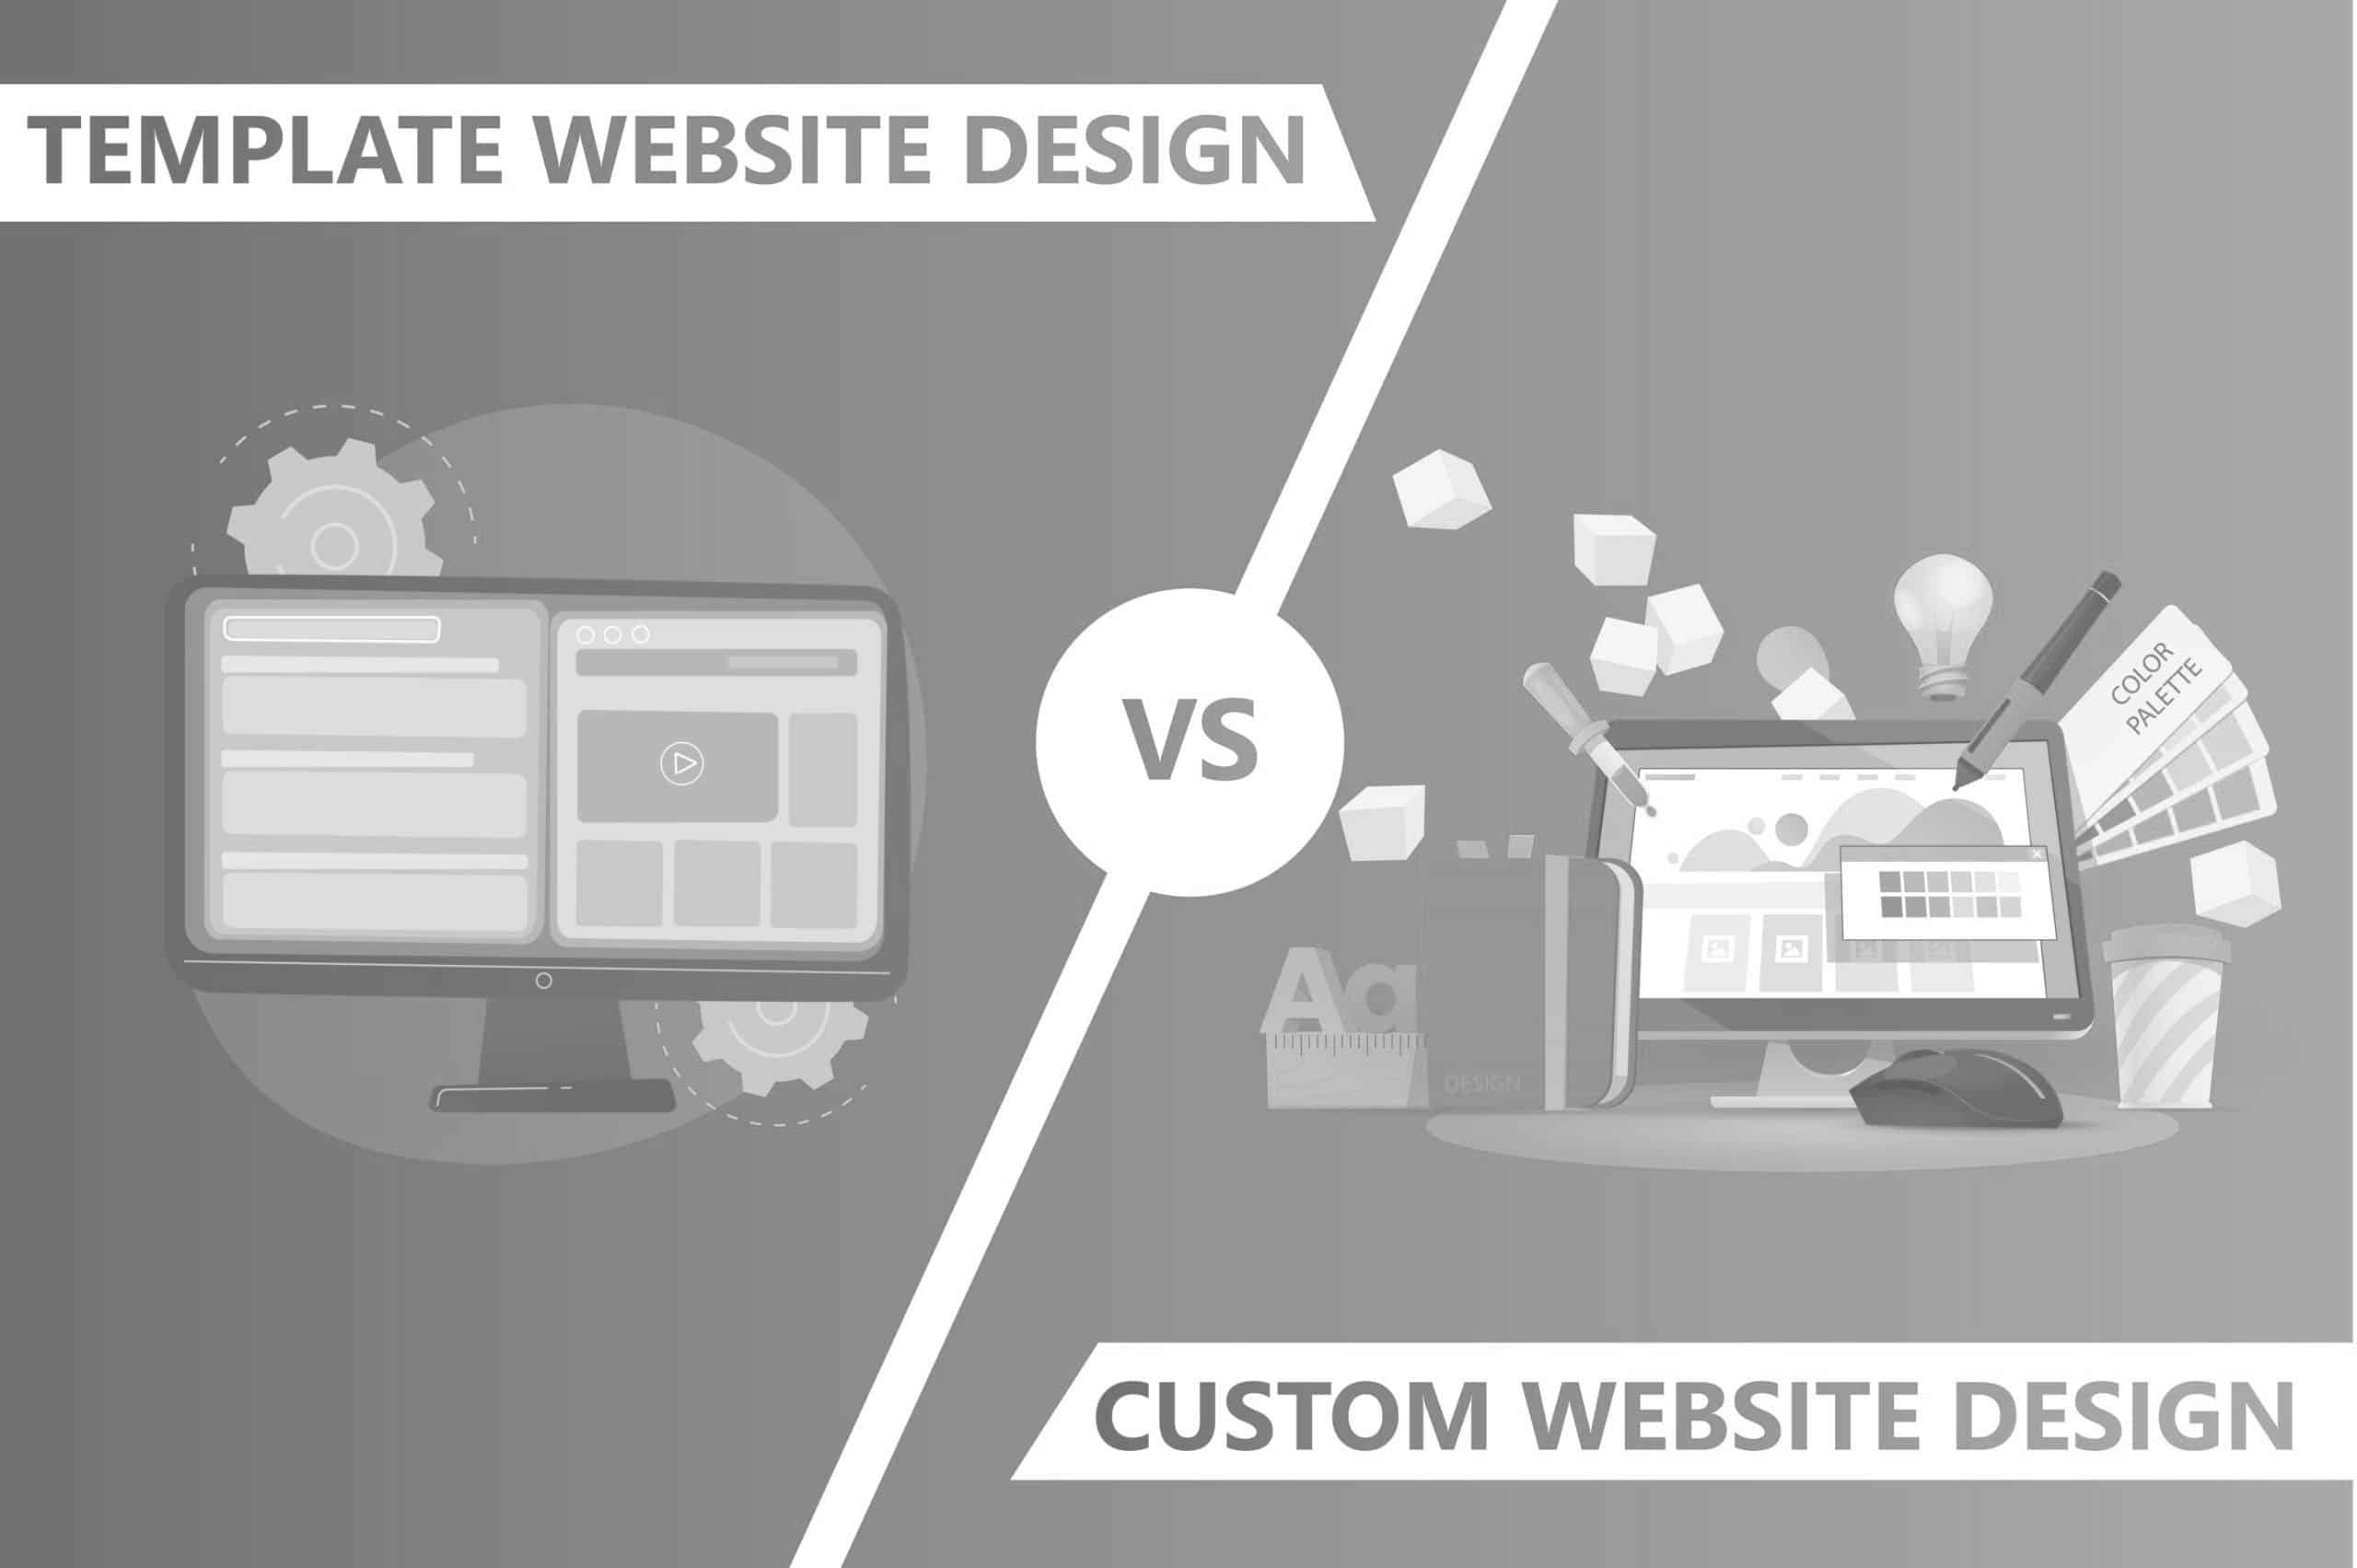 Making the Right Choice: How to Decide Between Template and Custom Website Design